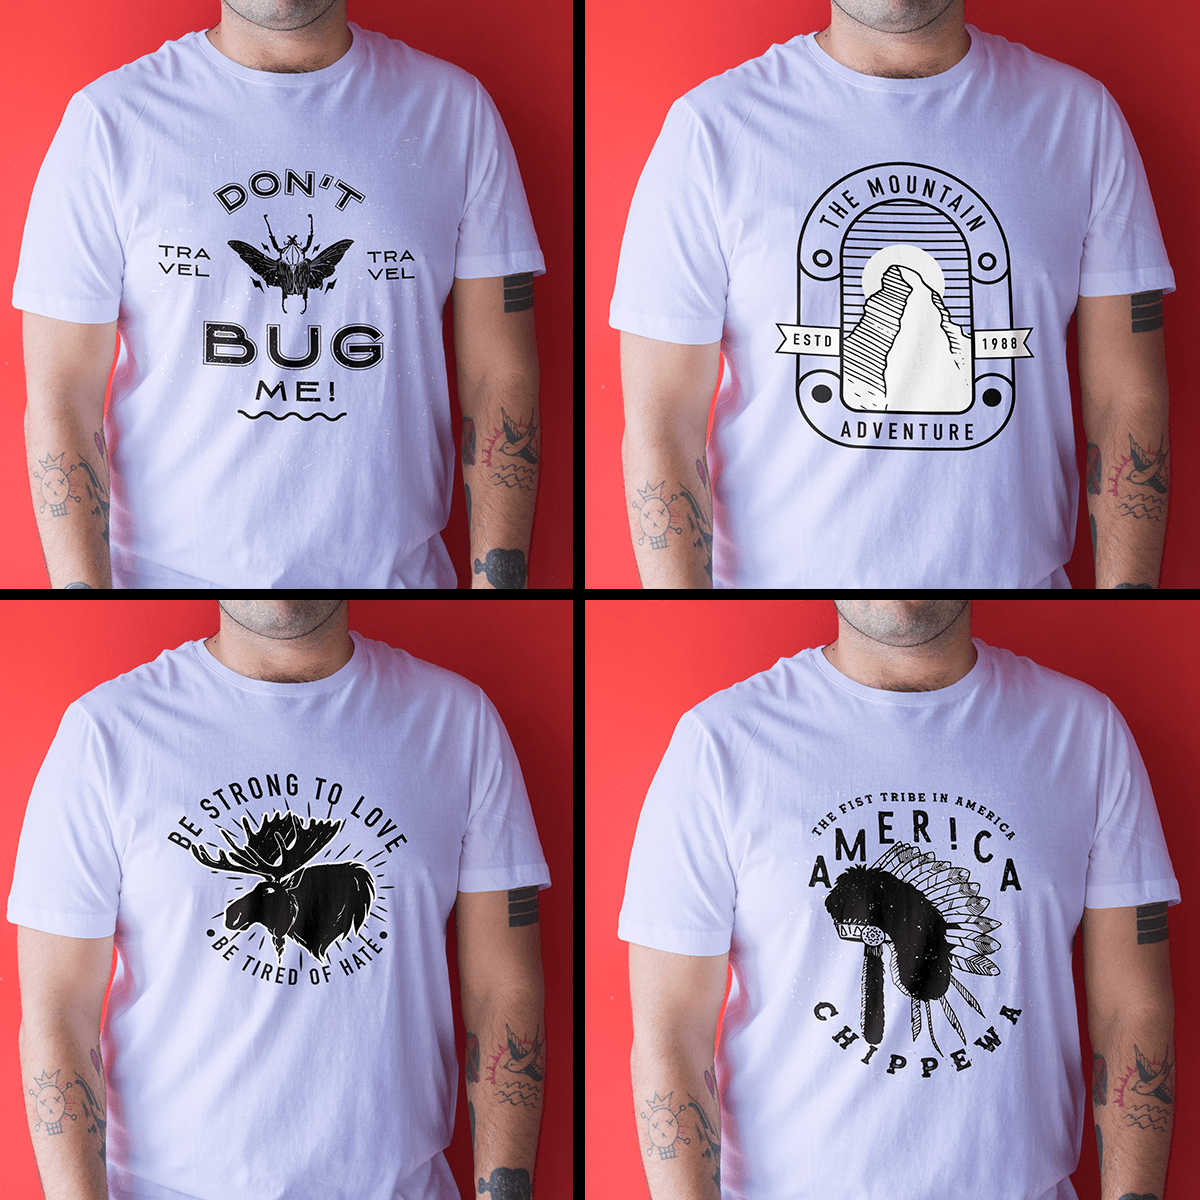 4 different designs featuring a bug, an elk, a mountain and a native american headwear